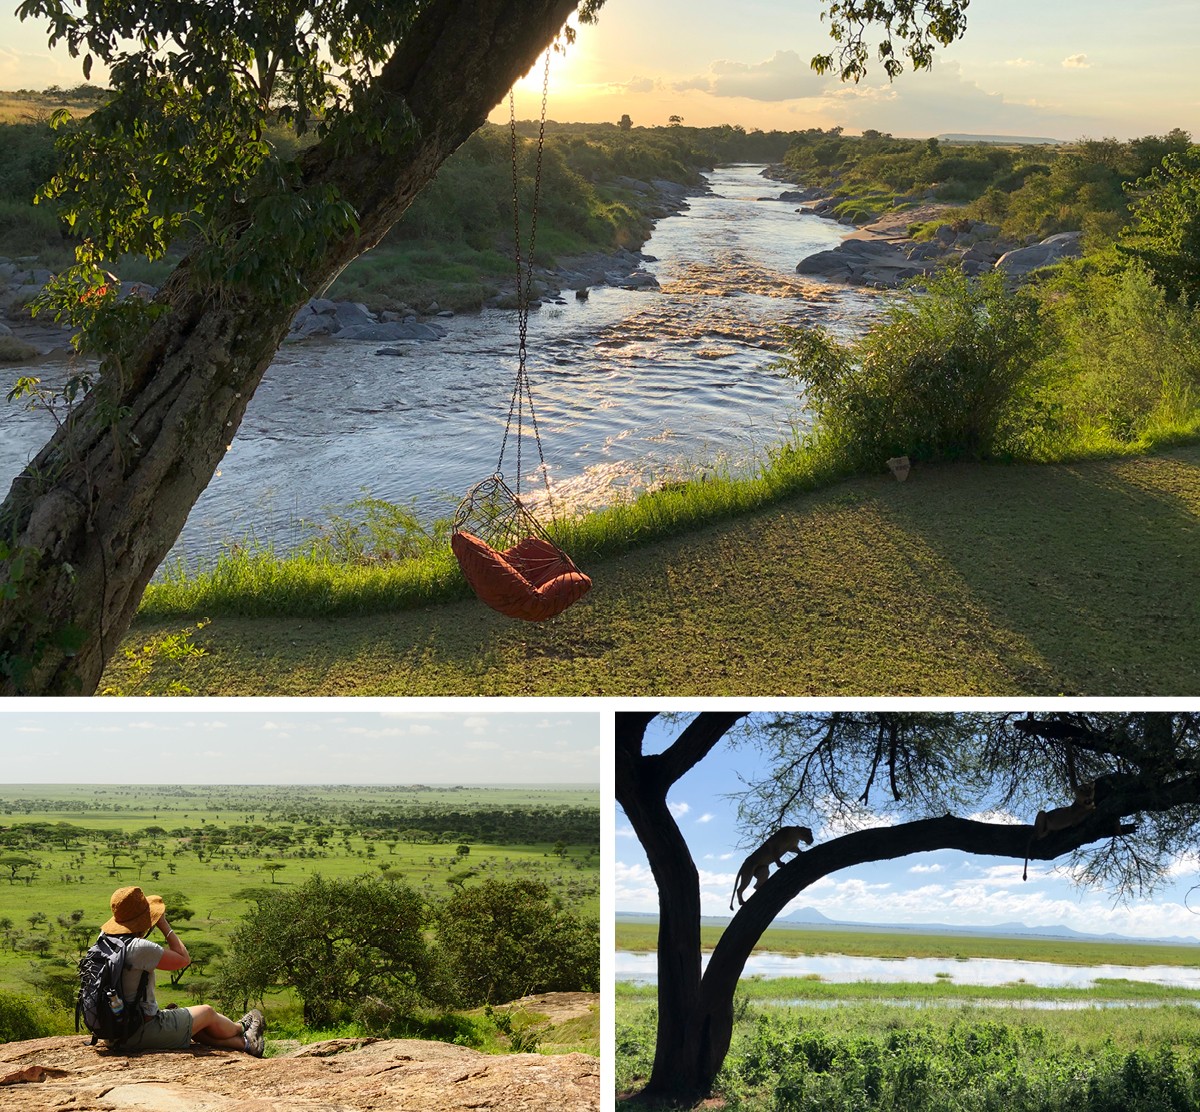 The Talek River from Rekero Camp, views over the Naboisho Conservancy, and a leopard in a tree in Tarangire National Park